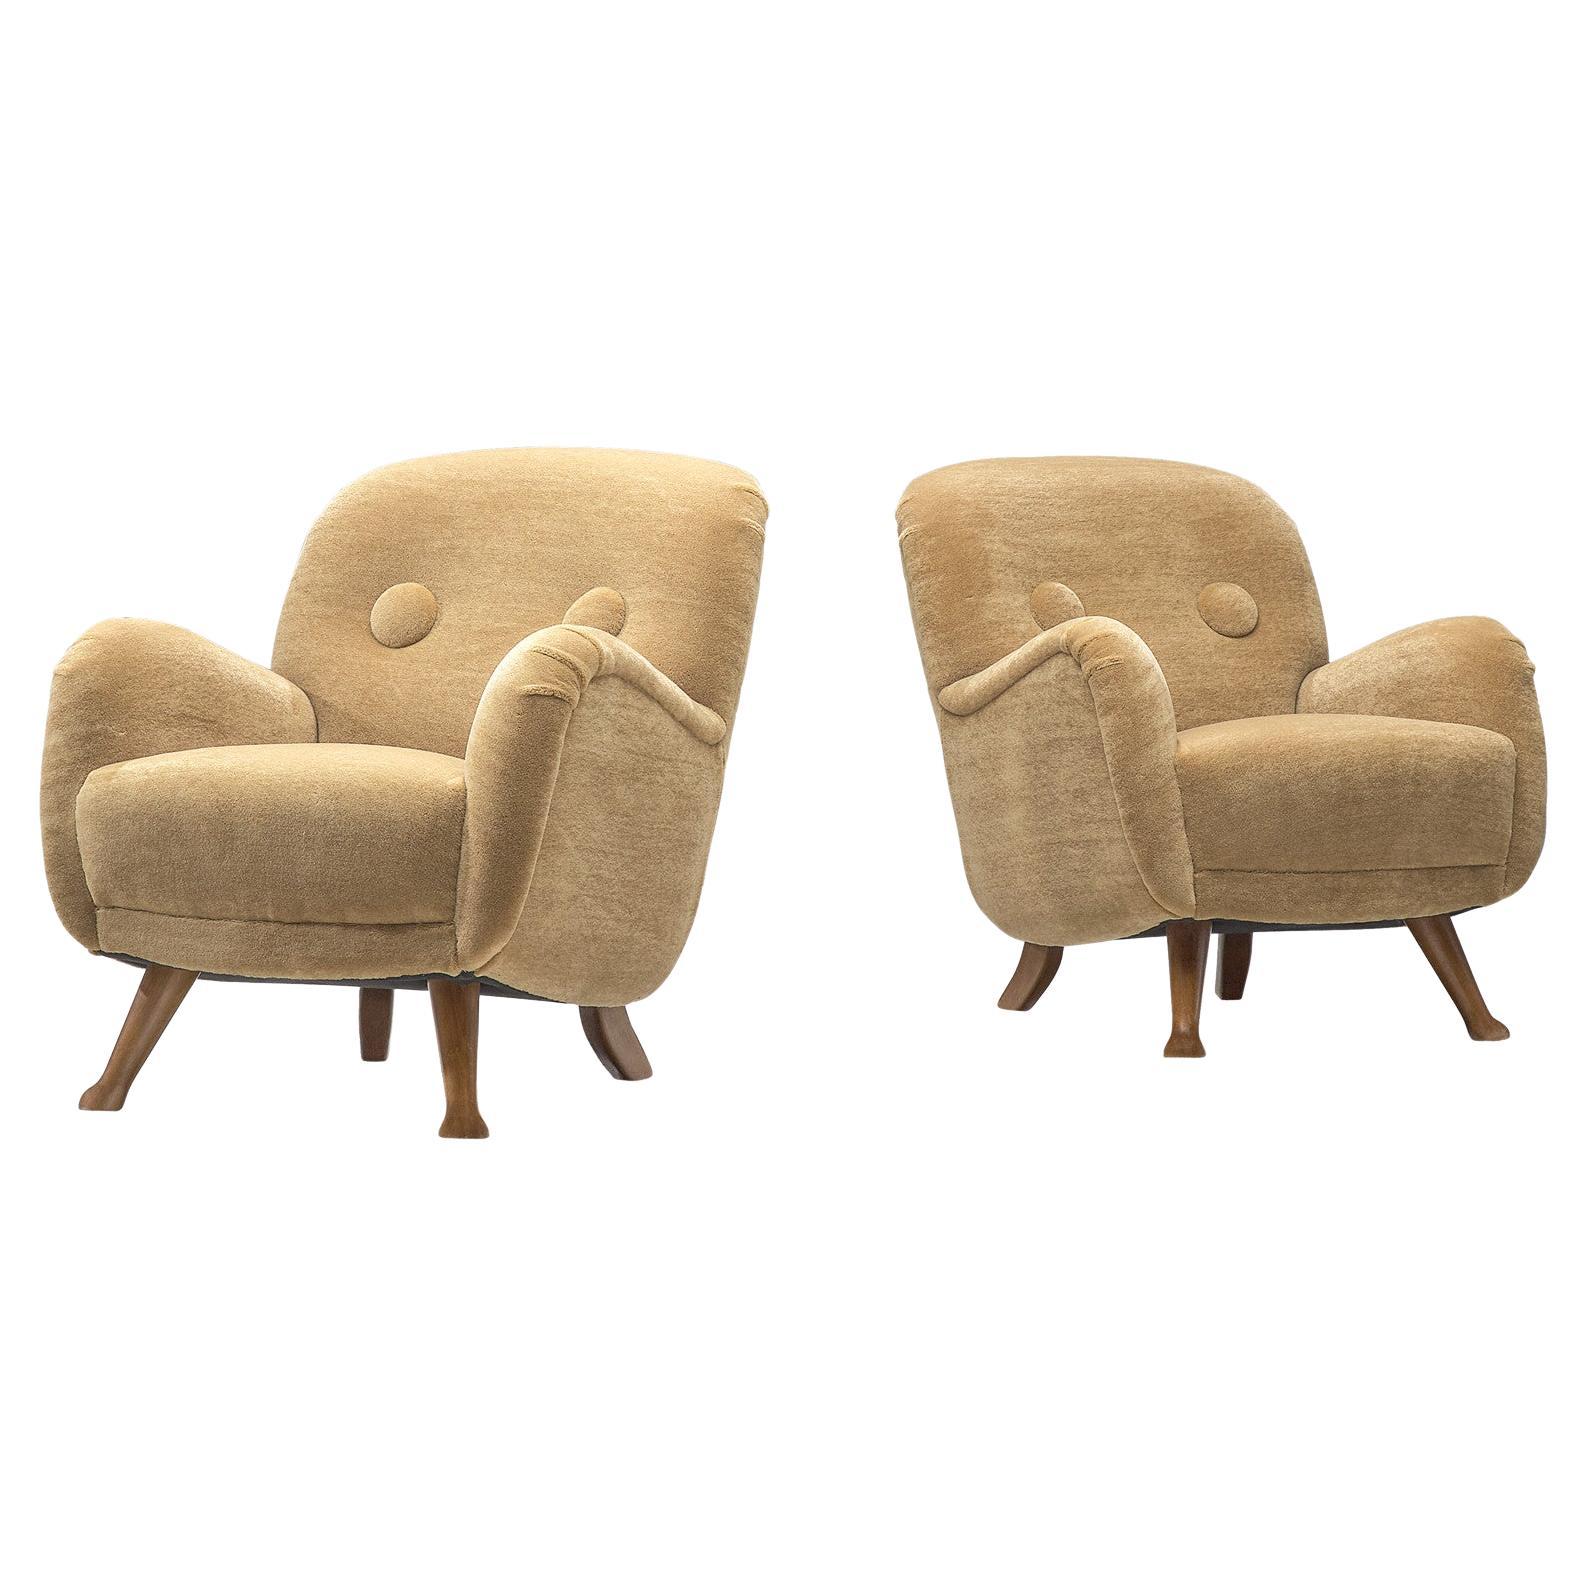 Berga Mobler Pair of Lounge Chairs in Beige Teddy 